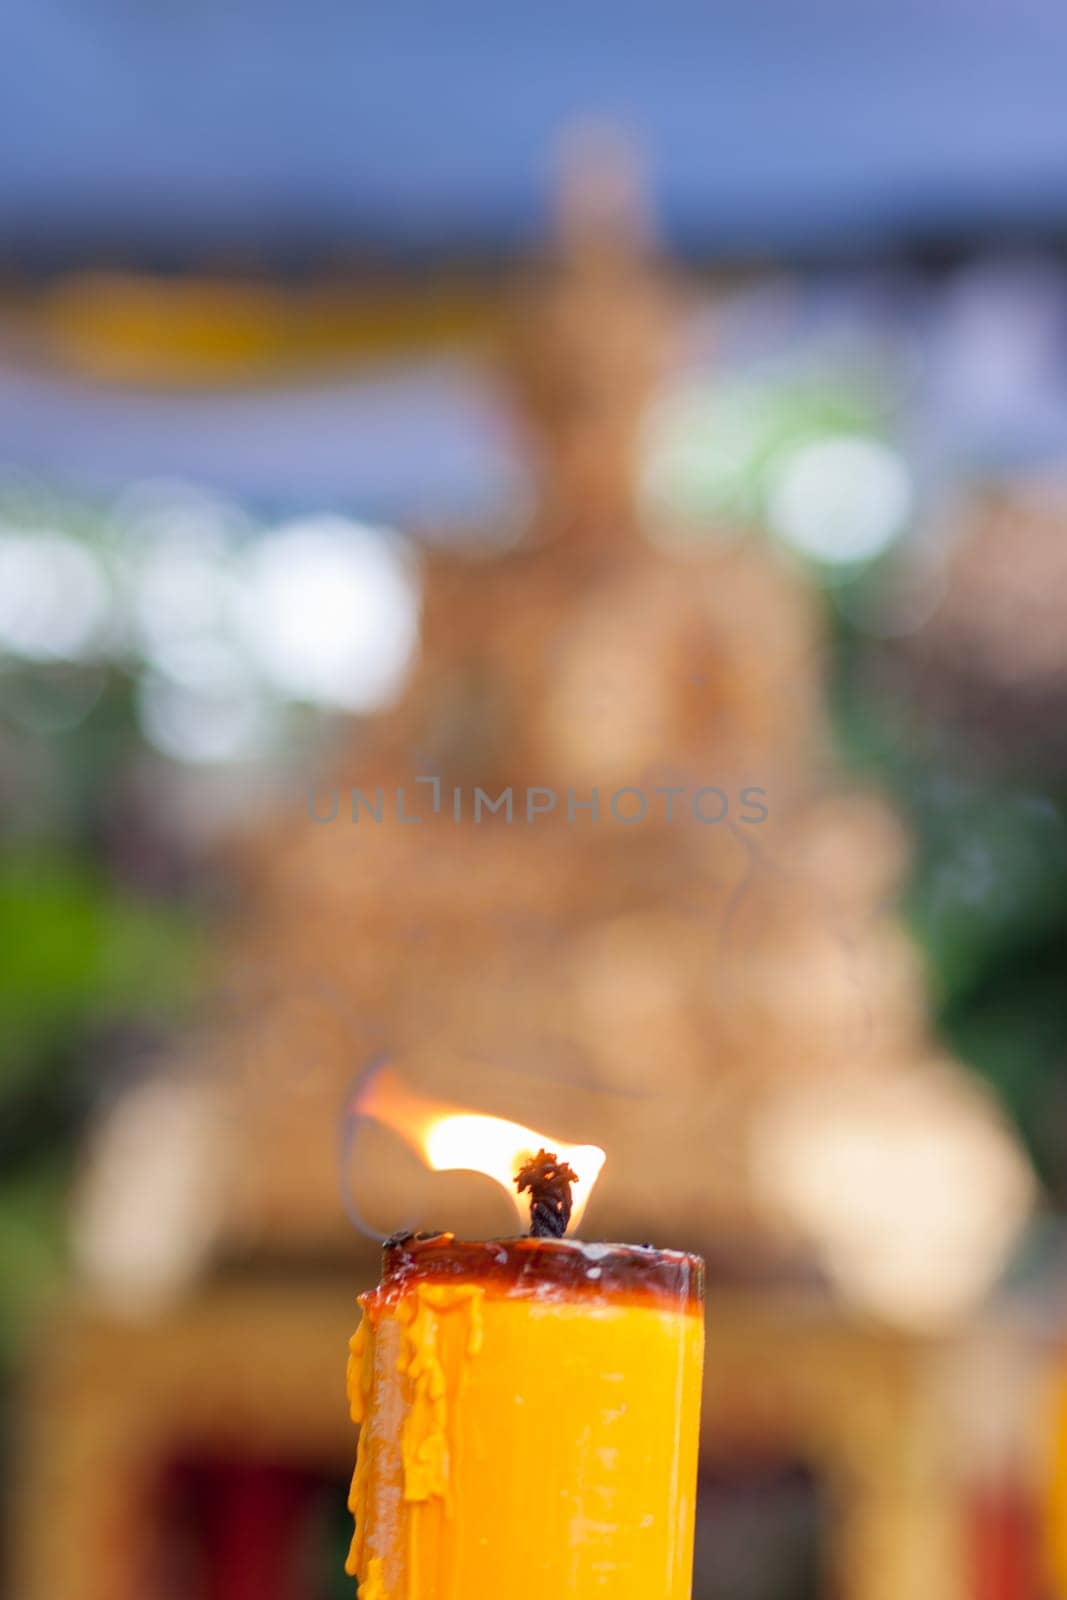 Candlelight burning in front of Buddha statue. Focus on candle frame, buddha blured in background. by kasto